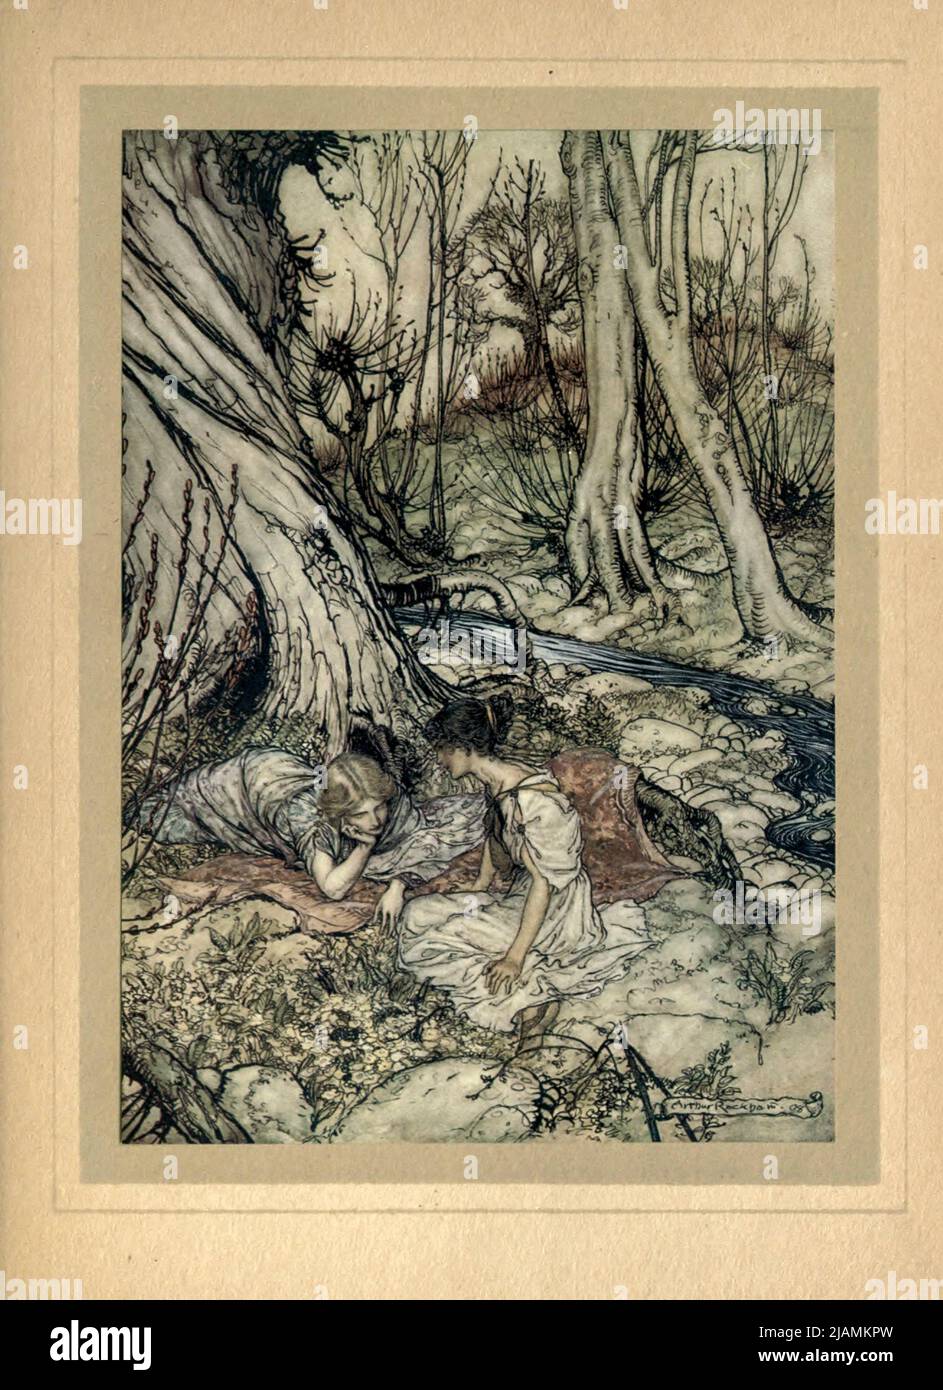 where often you and I Upon faint primrose-beds were wont to lie, Emptying our bosoms of their counsel sweet from ' A midsummer night's dream ' by William Shakespeare, 1564-1616; Illustrated by Arthur Rackham, 1867-1939 Publication date 1908 Publisher London, Heinemann; New York, Doubleday, Page & Co Stock Photo